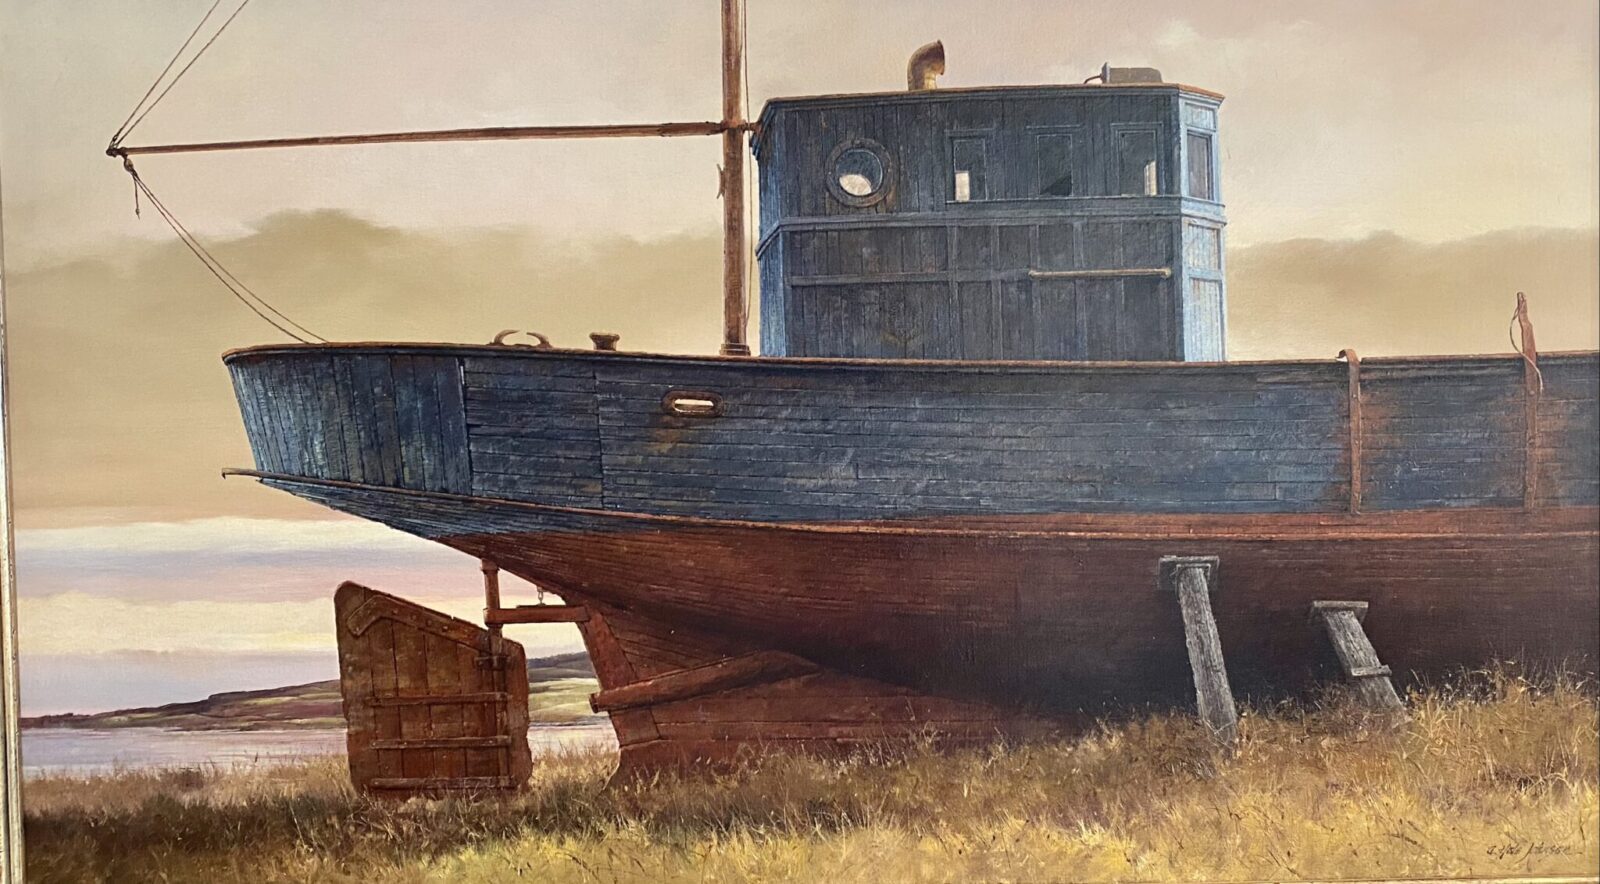 A painting of a blue boat on a grassy field.